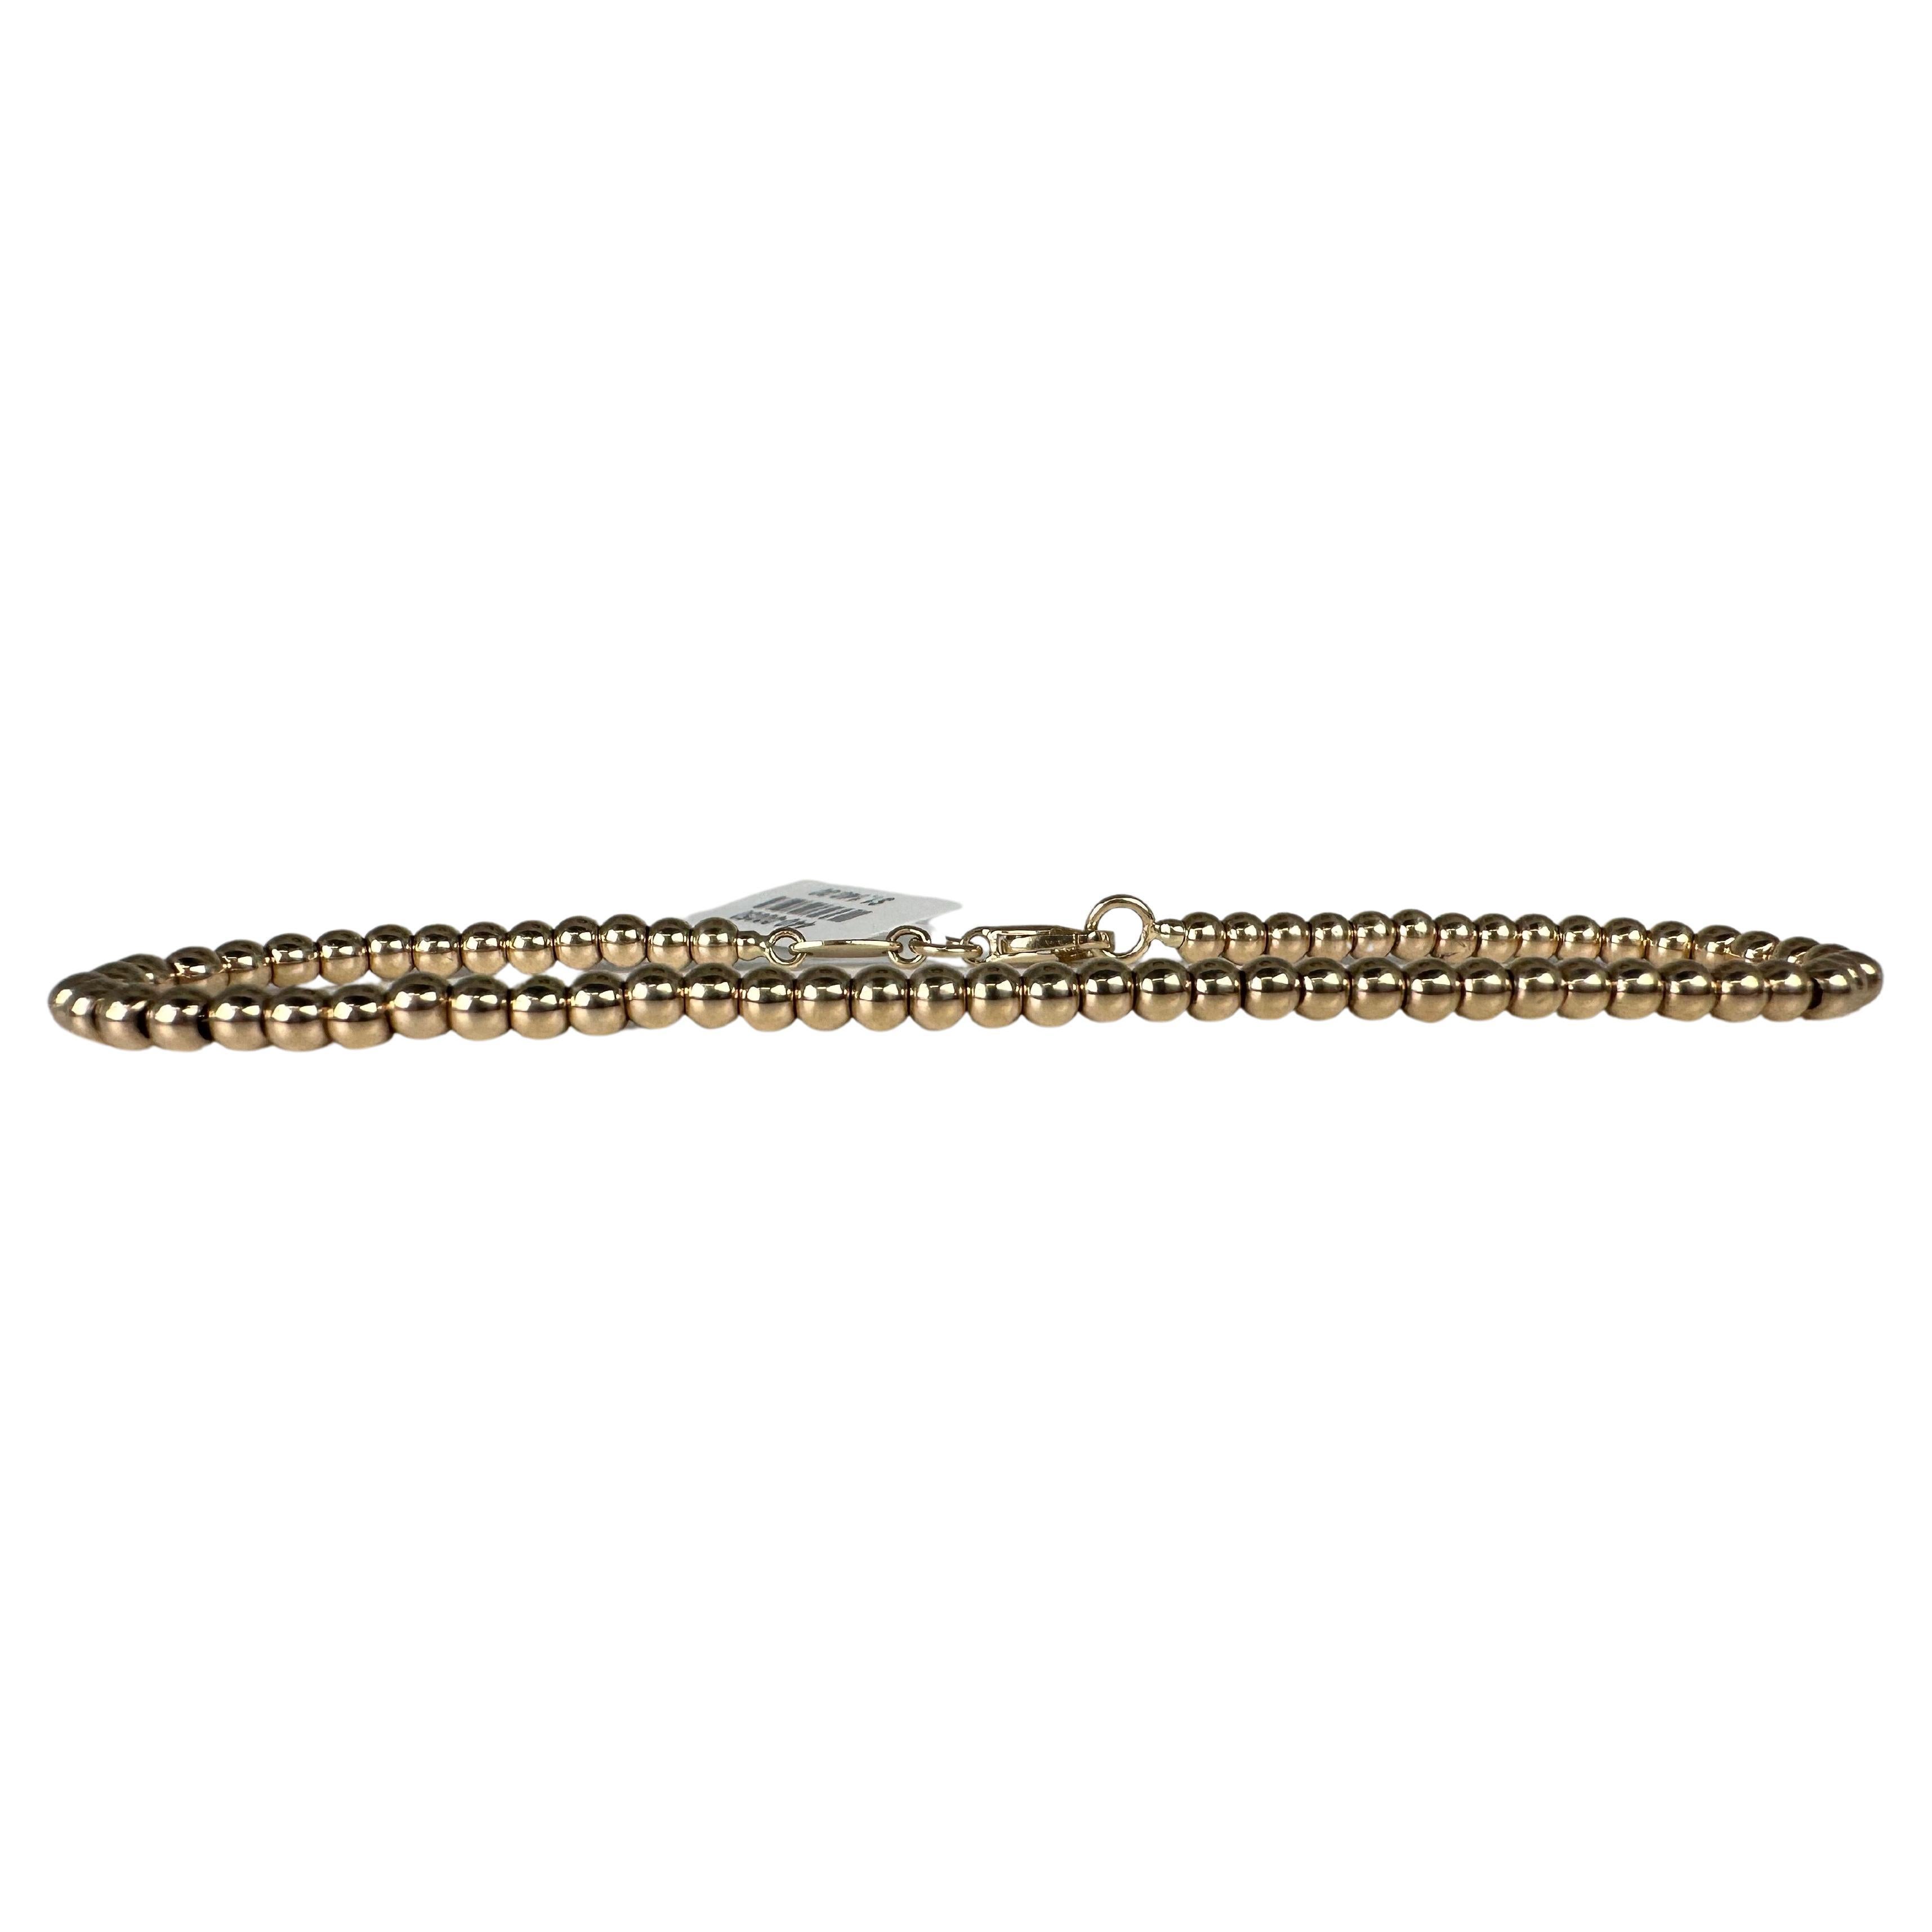 Bubble bracelet 14KT yellow gold 7.5 inches